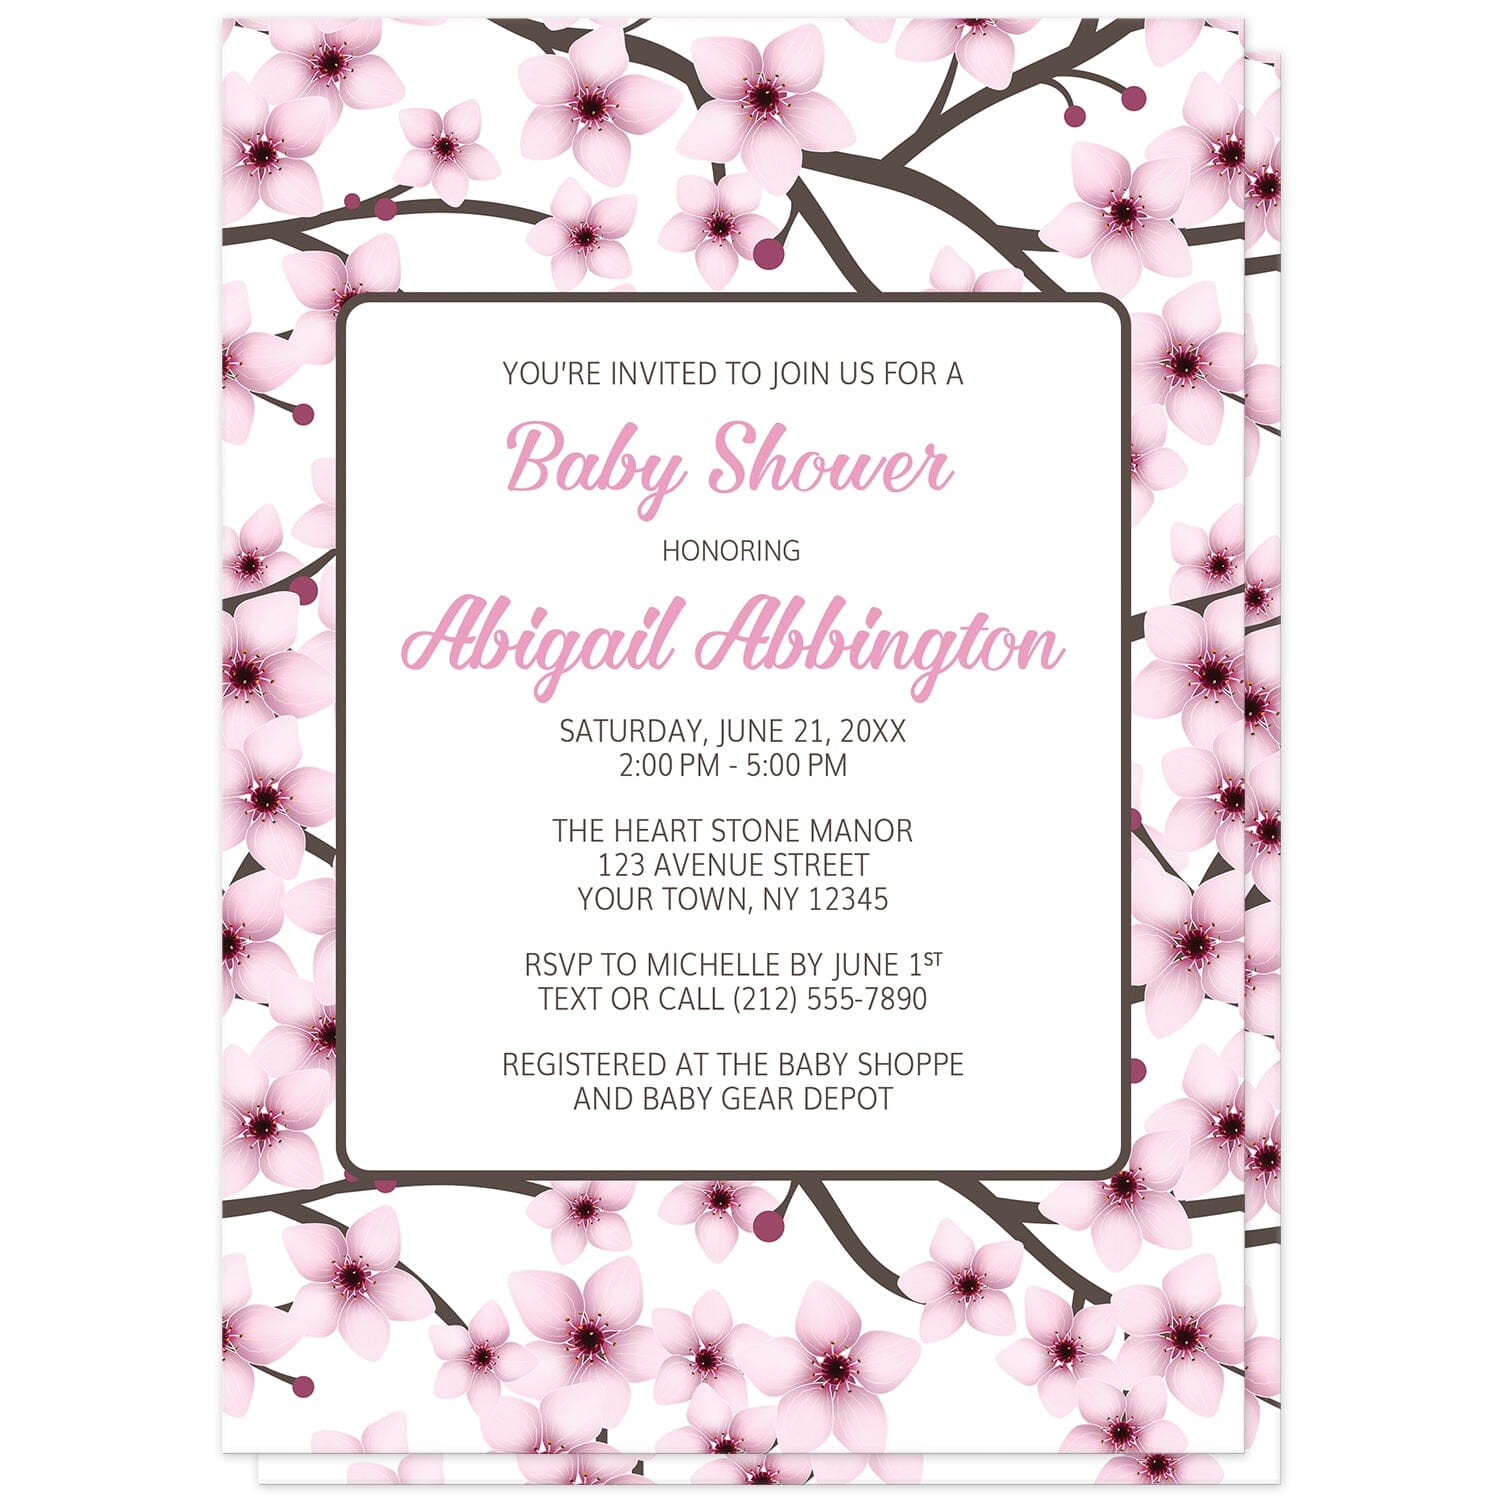 Cherry Blossom Baby Shower Invitations (front) at Artistically Invited. Cherry blossom baby shower invitations designed with a gorgeous pattern of pink cherry blossom branches. This beautiful floral background design is also printed on the back side of the invitations. Personalize these invitations with your baby shower celebration details in pink and dark brown in a white rectangular area over the pretty cherry blossoms. 